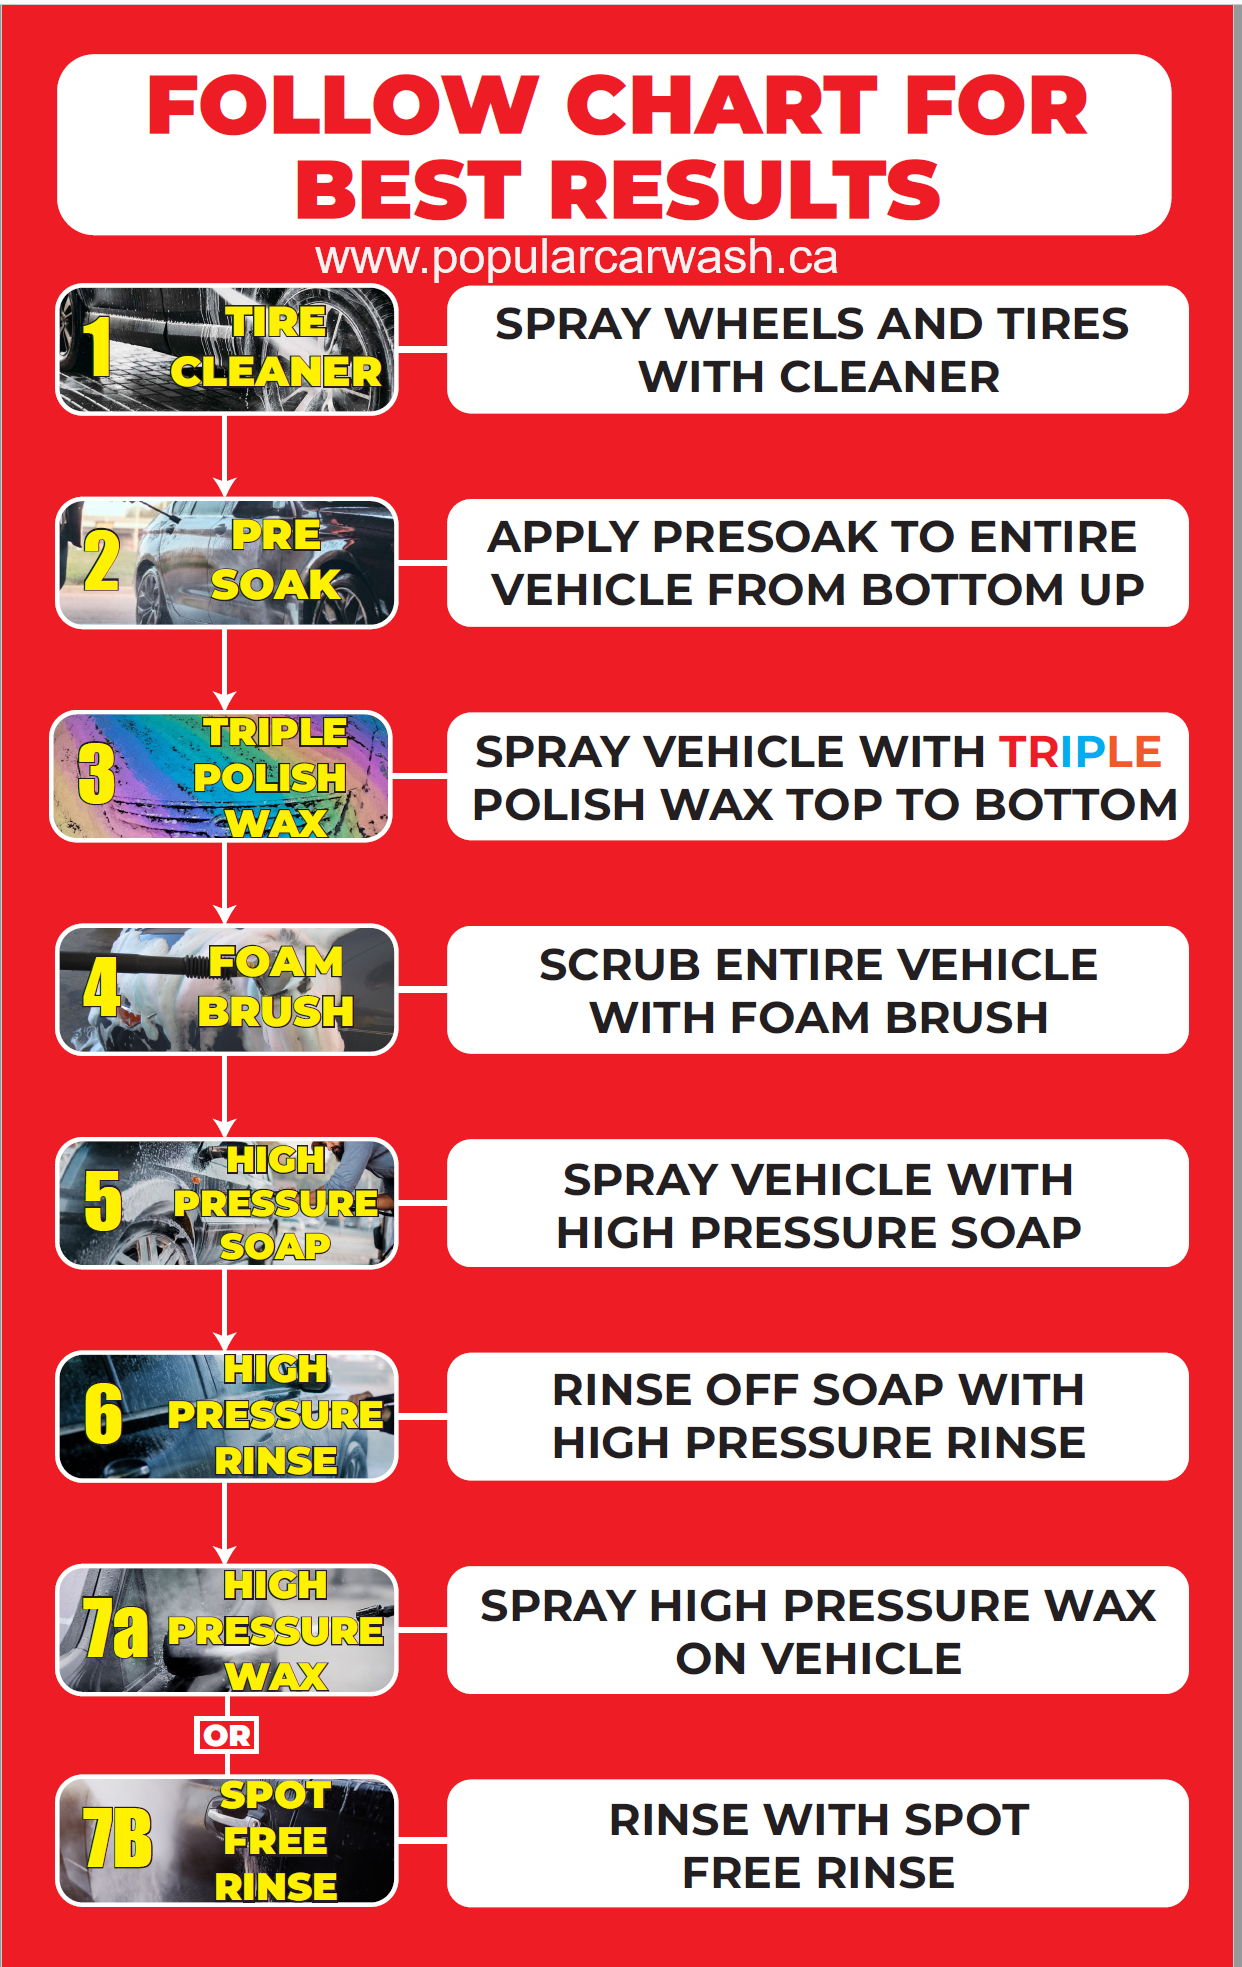 Step by Step guide to washing a car at Hopkins street self serve car wash Whitby.